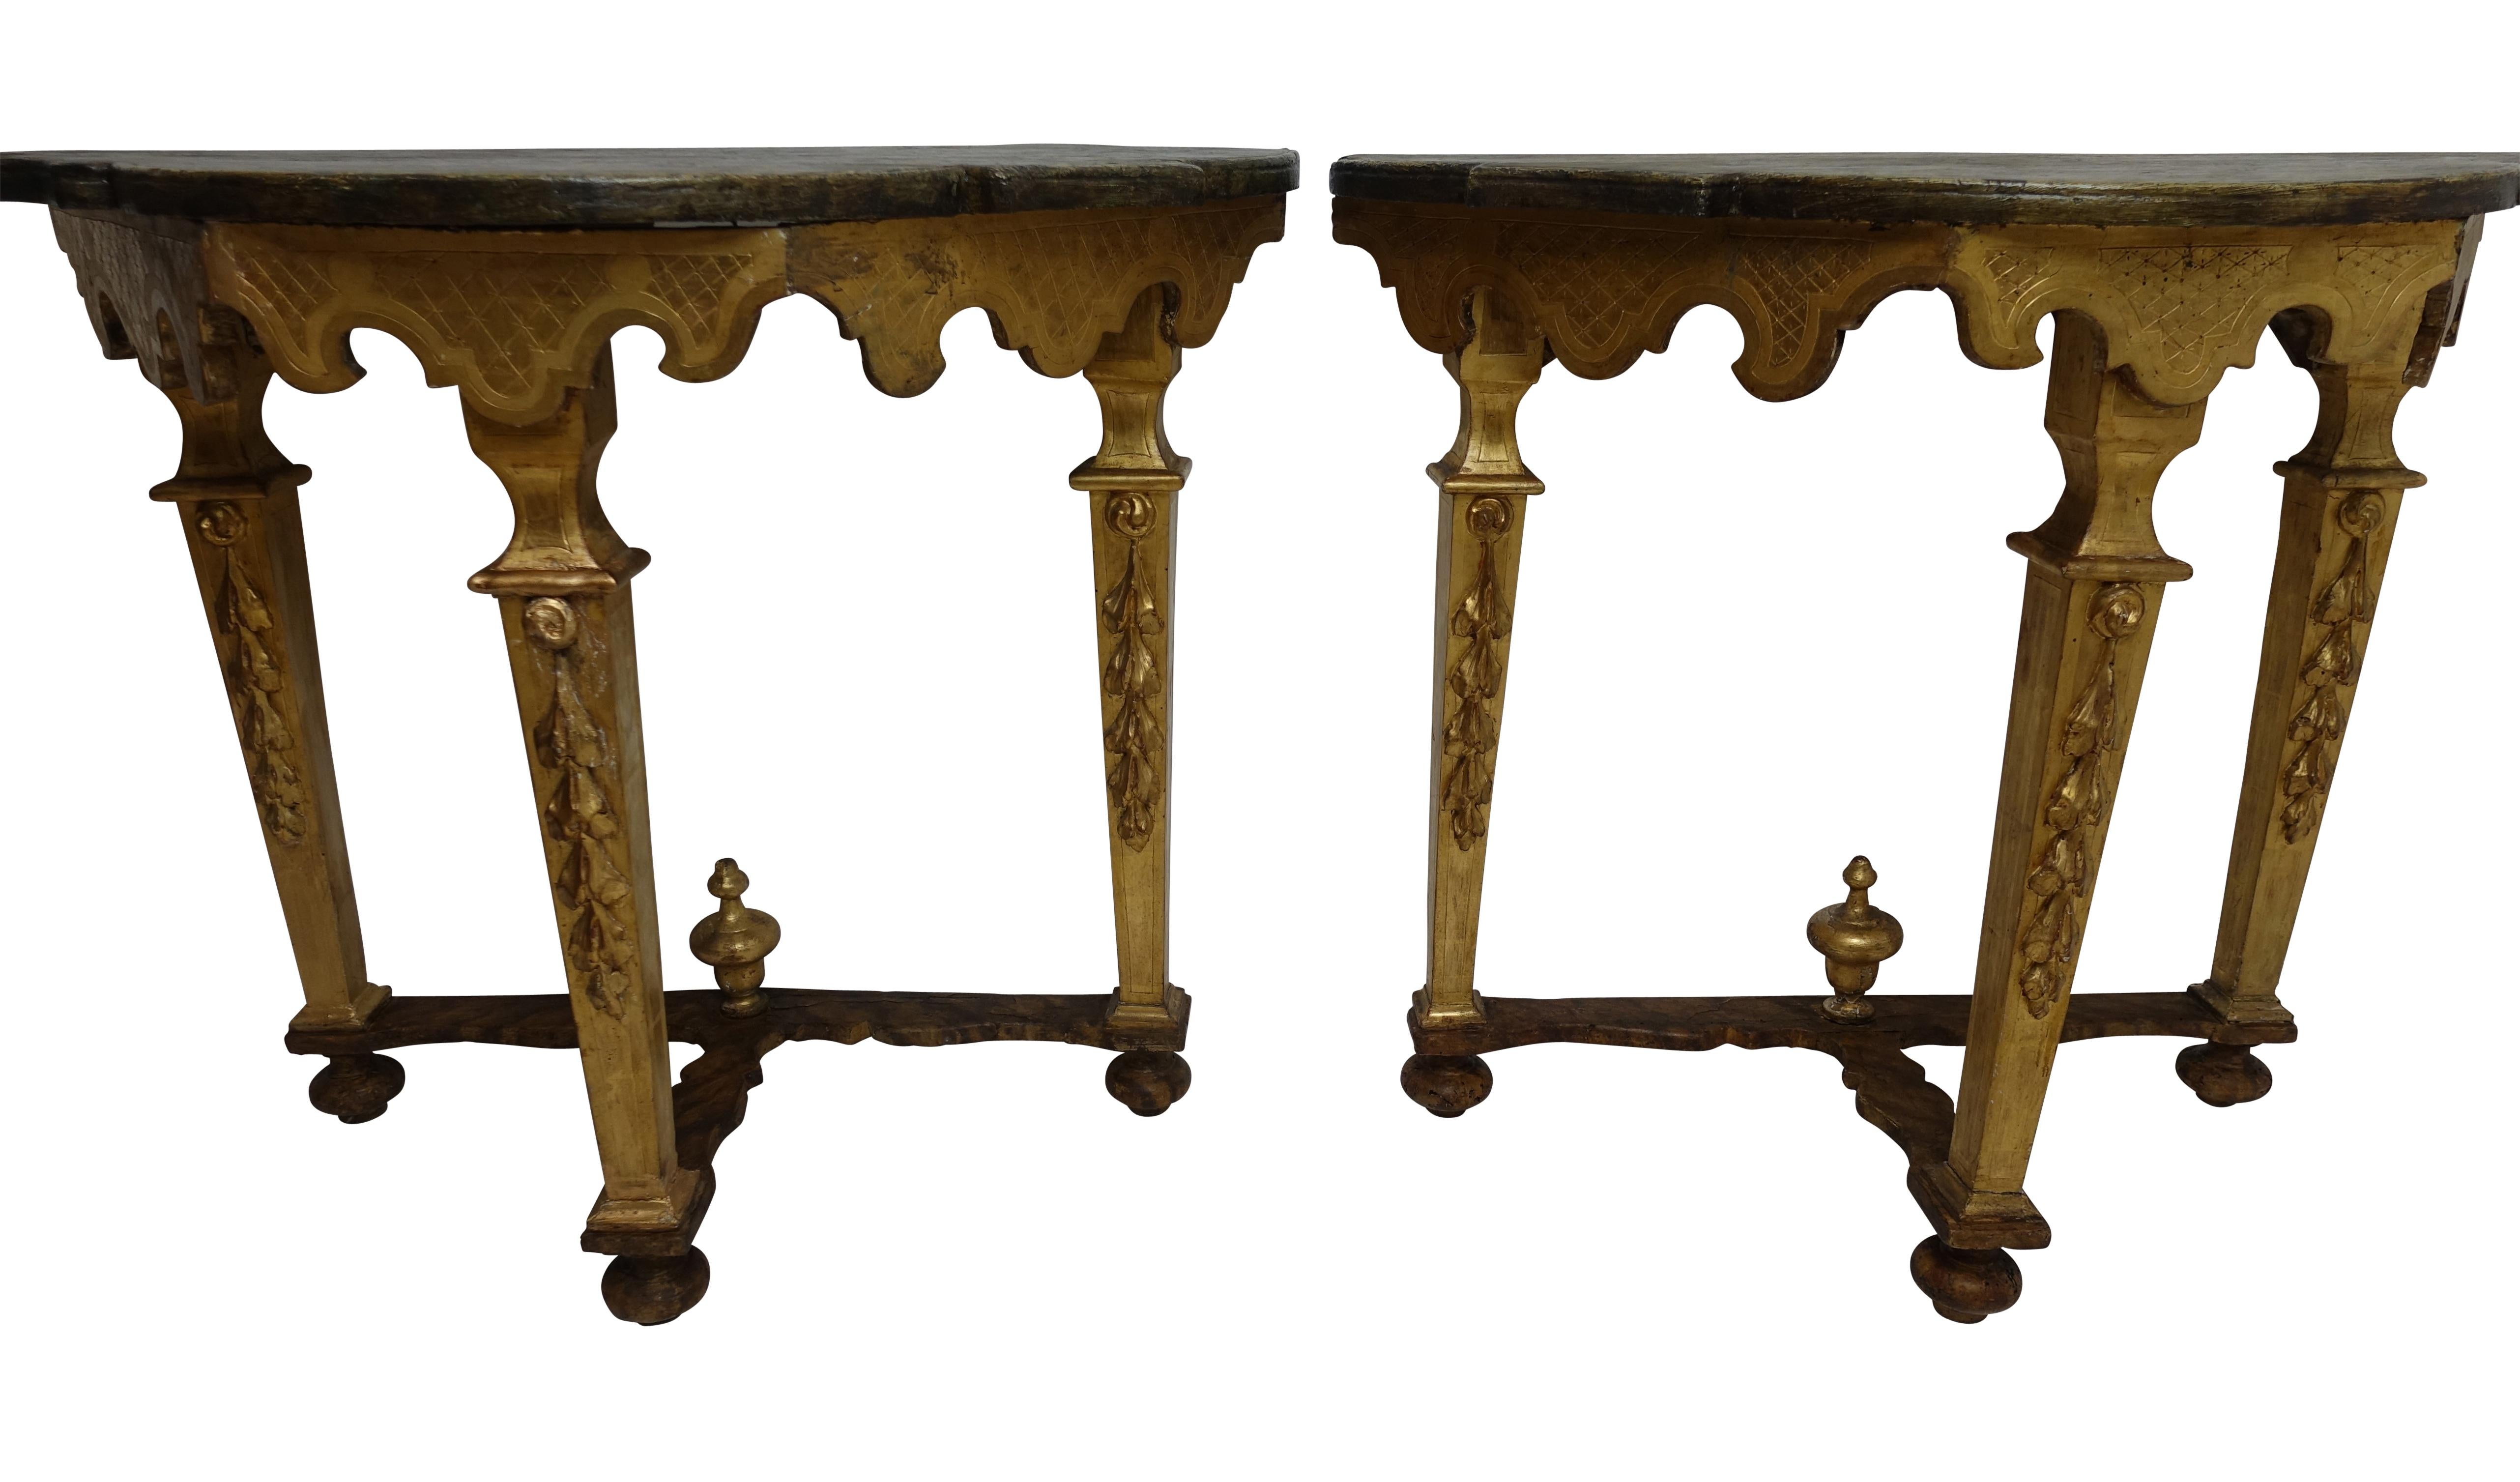 A wonderful pair of old Florentine style hand-carved and gessoed console tables with a later faux marbleized finish on the top and stretcher, having a gilt scalloped apron, standing on three canted supports and sitting on bun feet, Italy, 18th